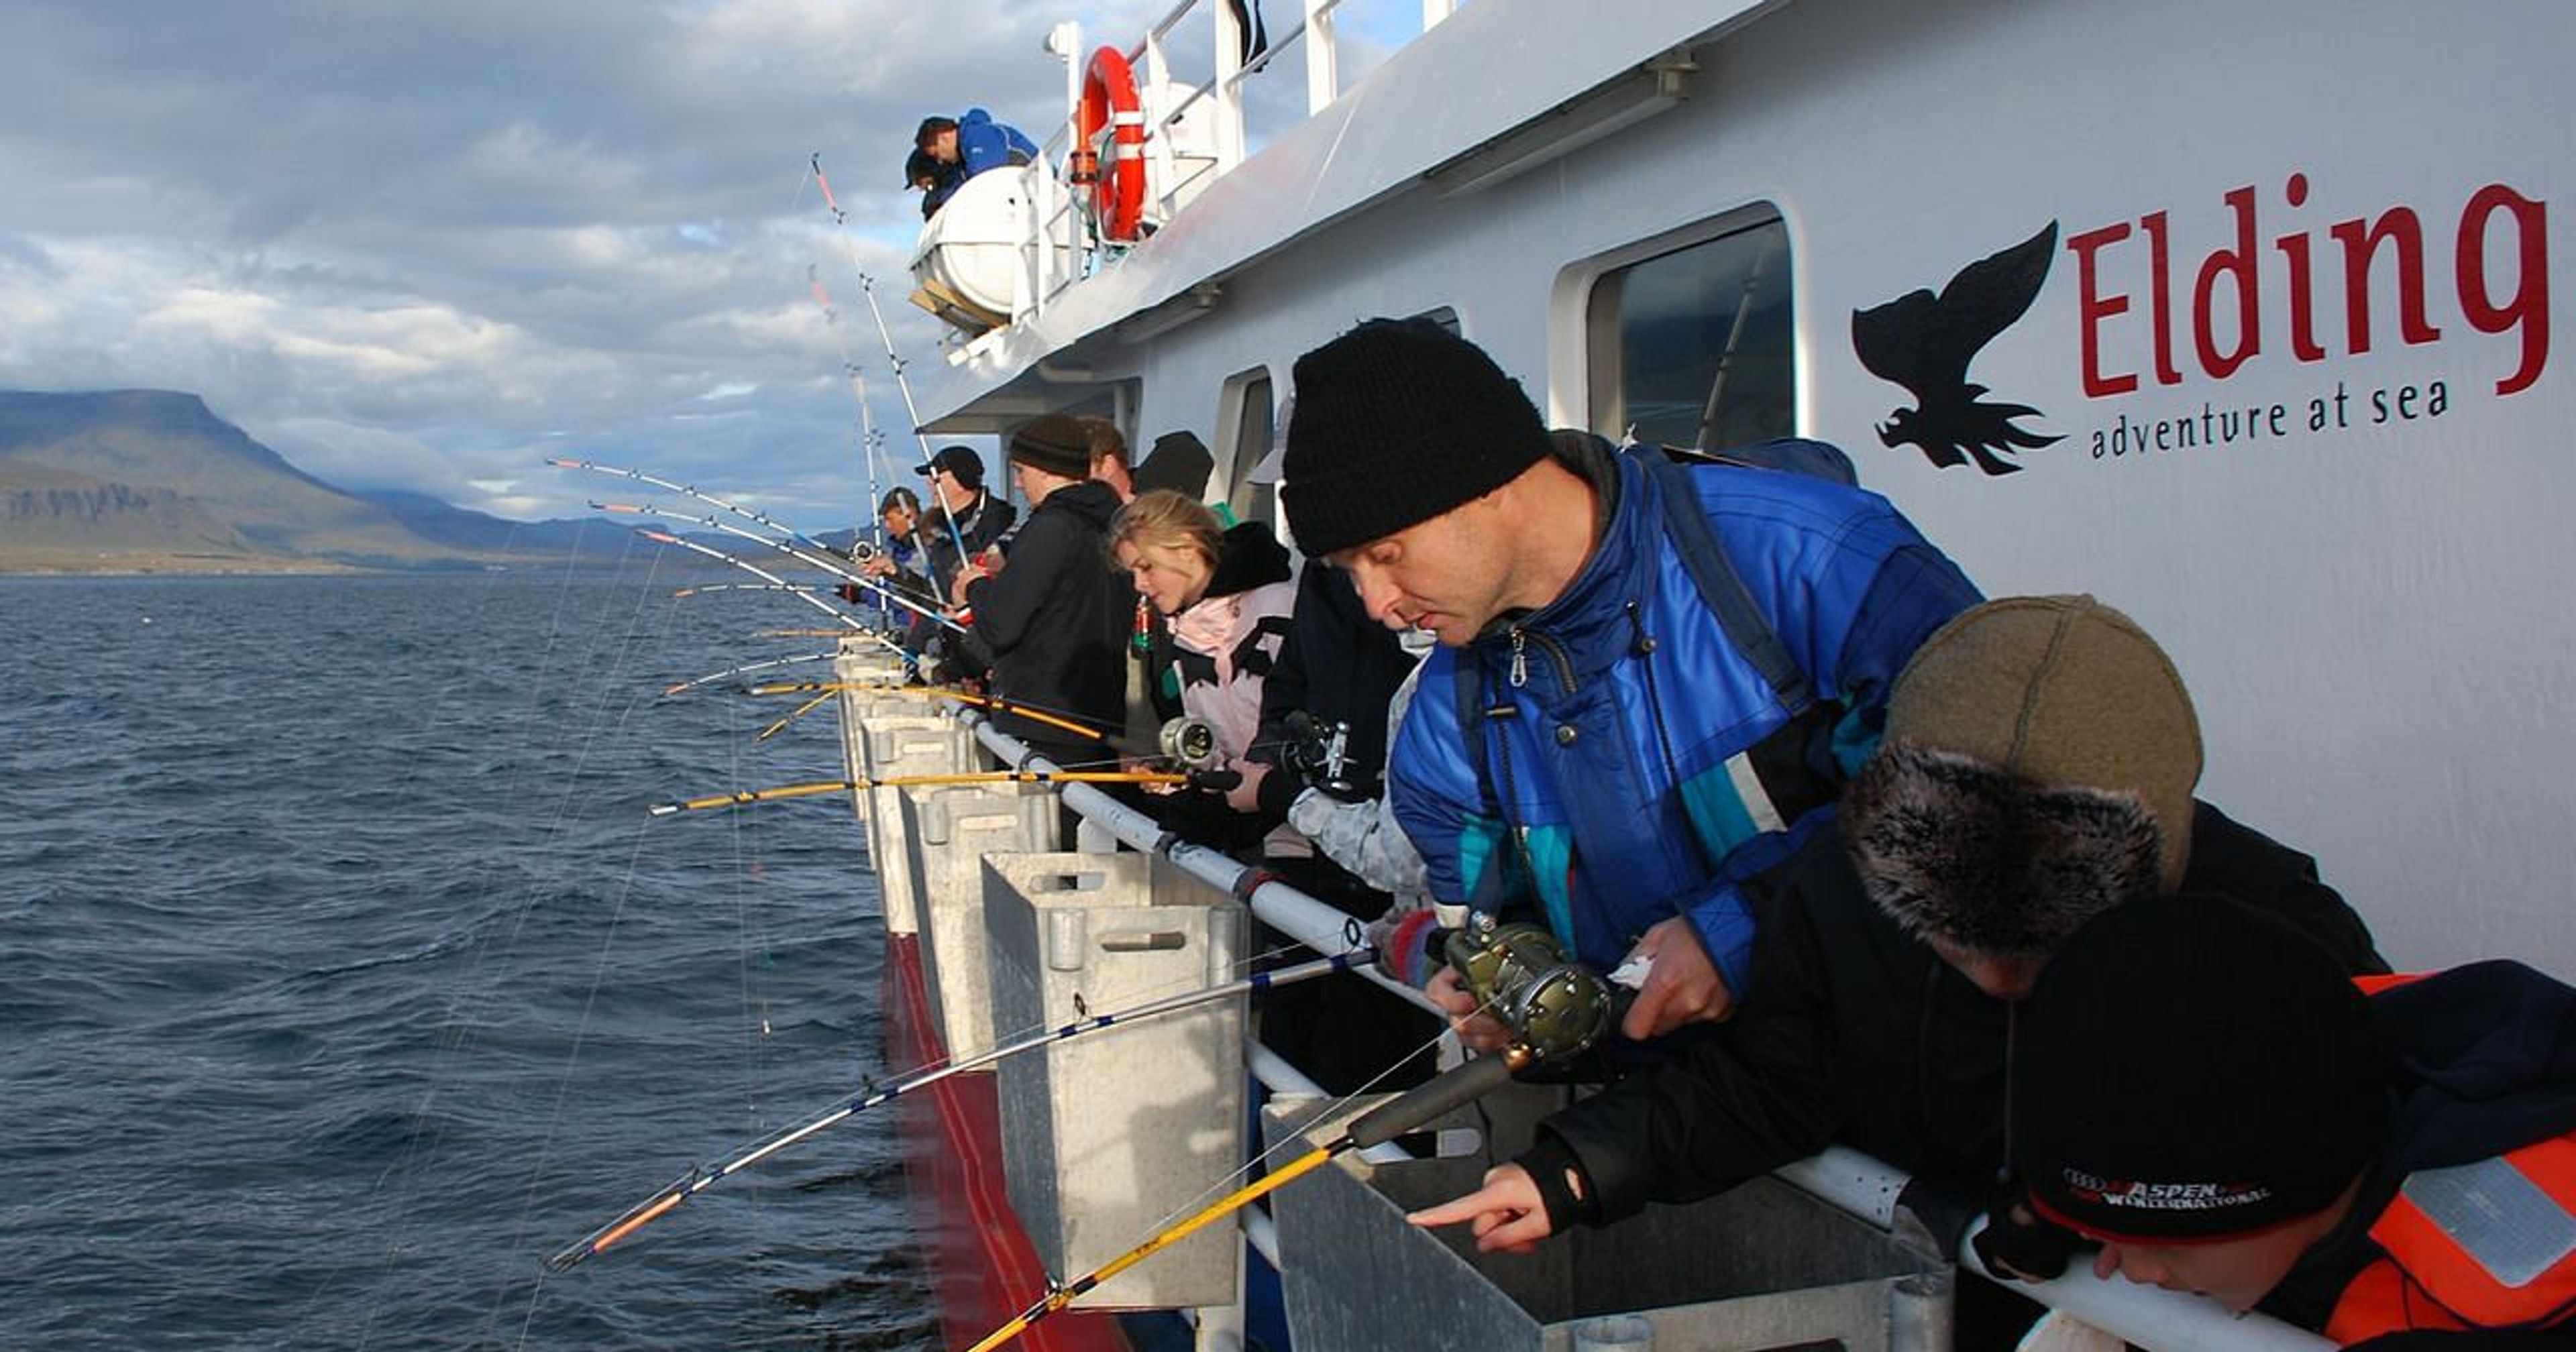 a group of people went out to sea to fish, excursion in Iceland 